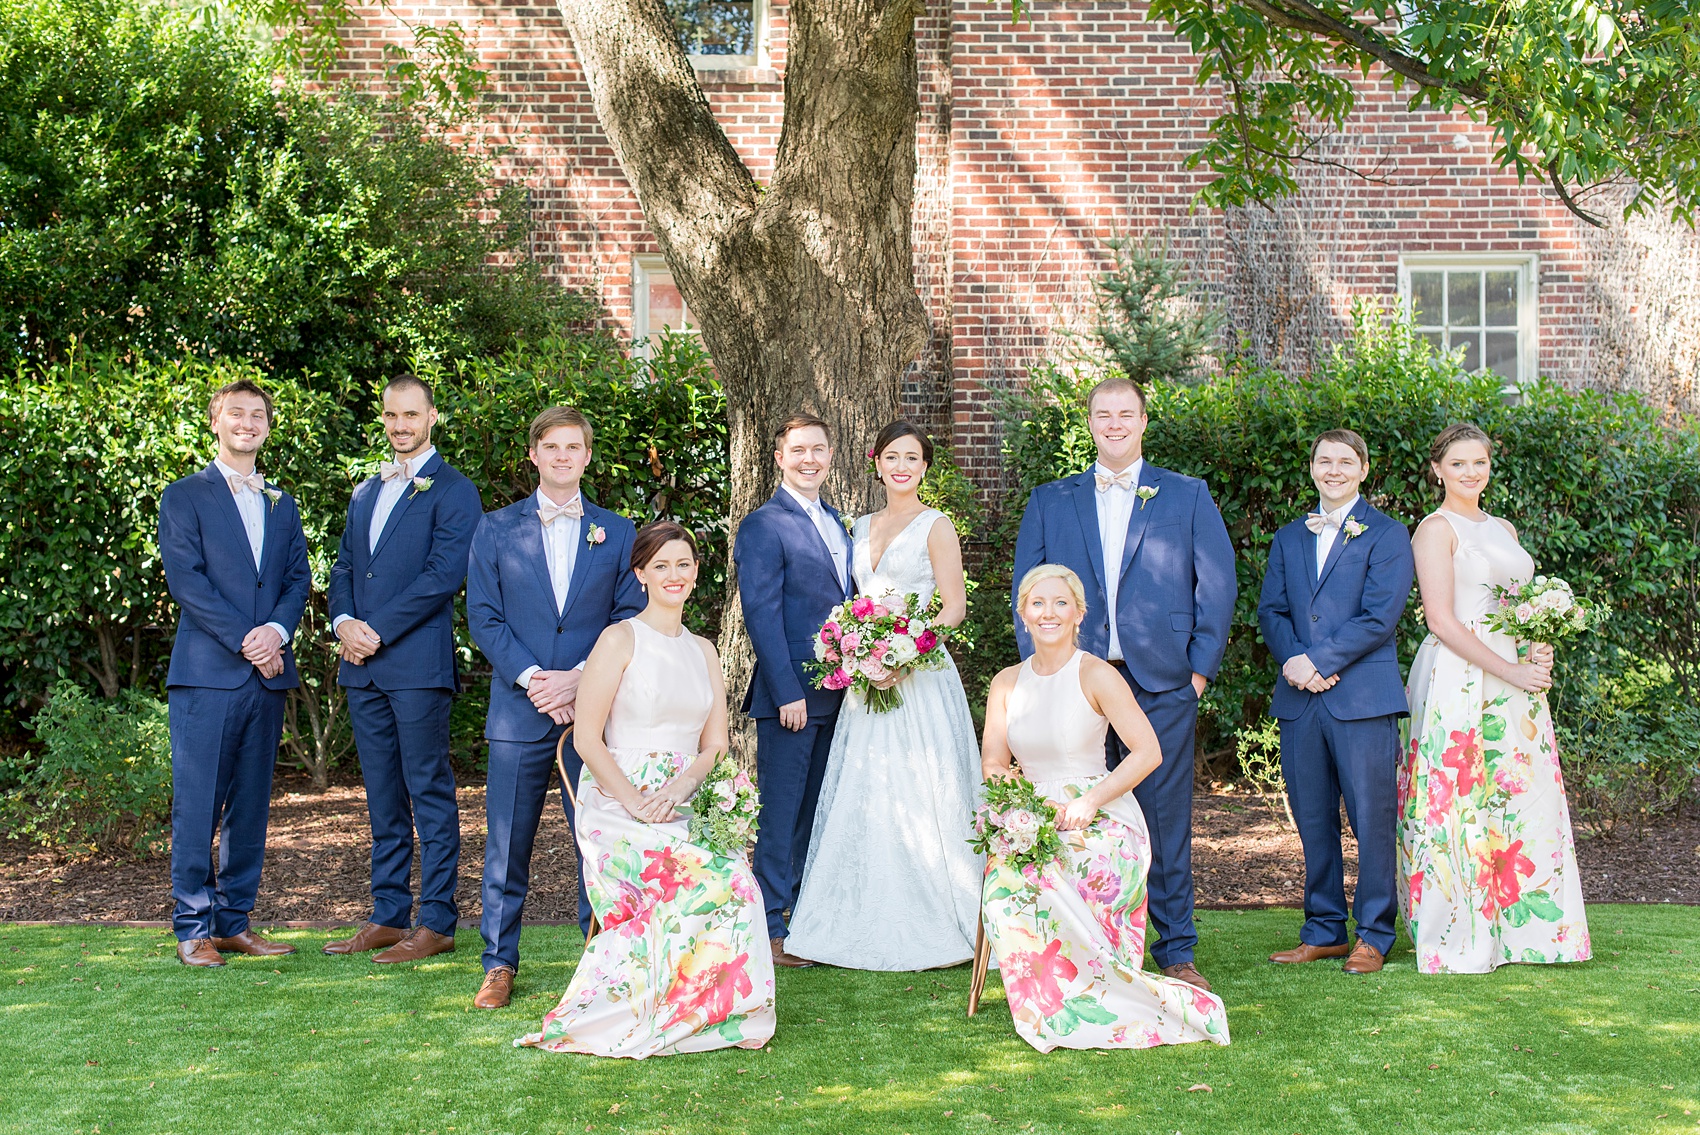 Mikkel Paige Photography pictures from a Merrimon-Wynne House wedding in Raleigh, NC. Photo of the wedding party on the lawn. Bridesmaids wore floral pink dresses and the groomsmen wore blue suits.